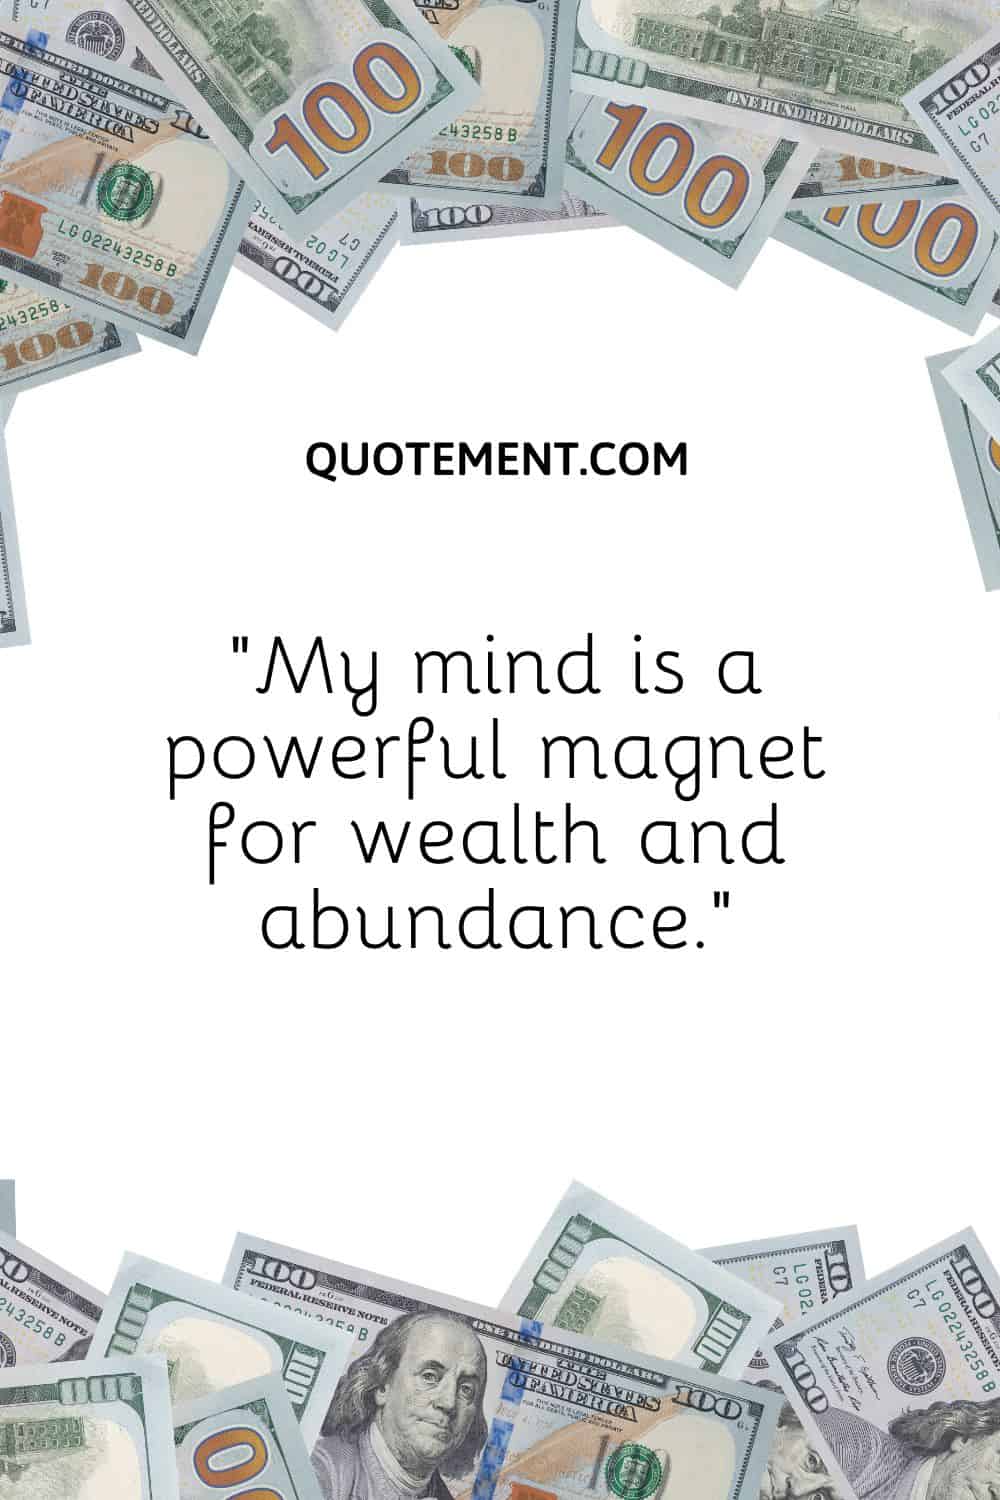 “My mind is a powerful magnet for wealth and abundance.”